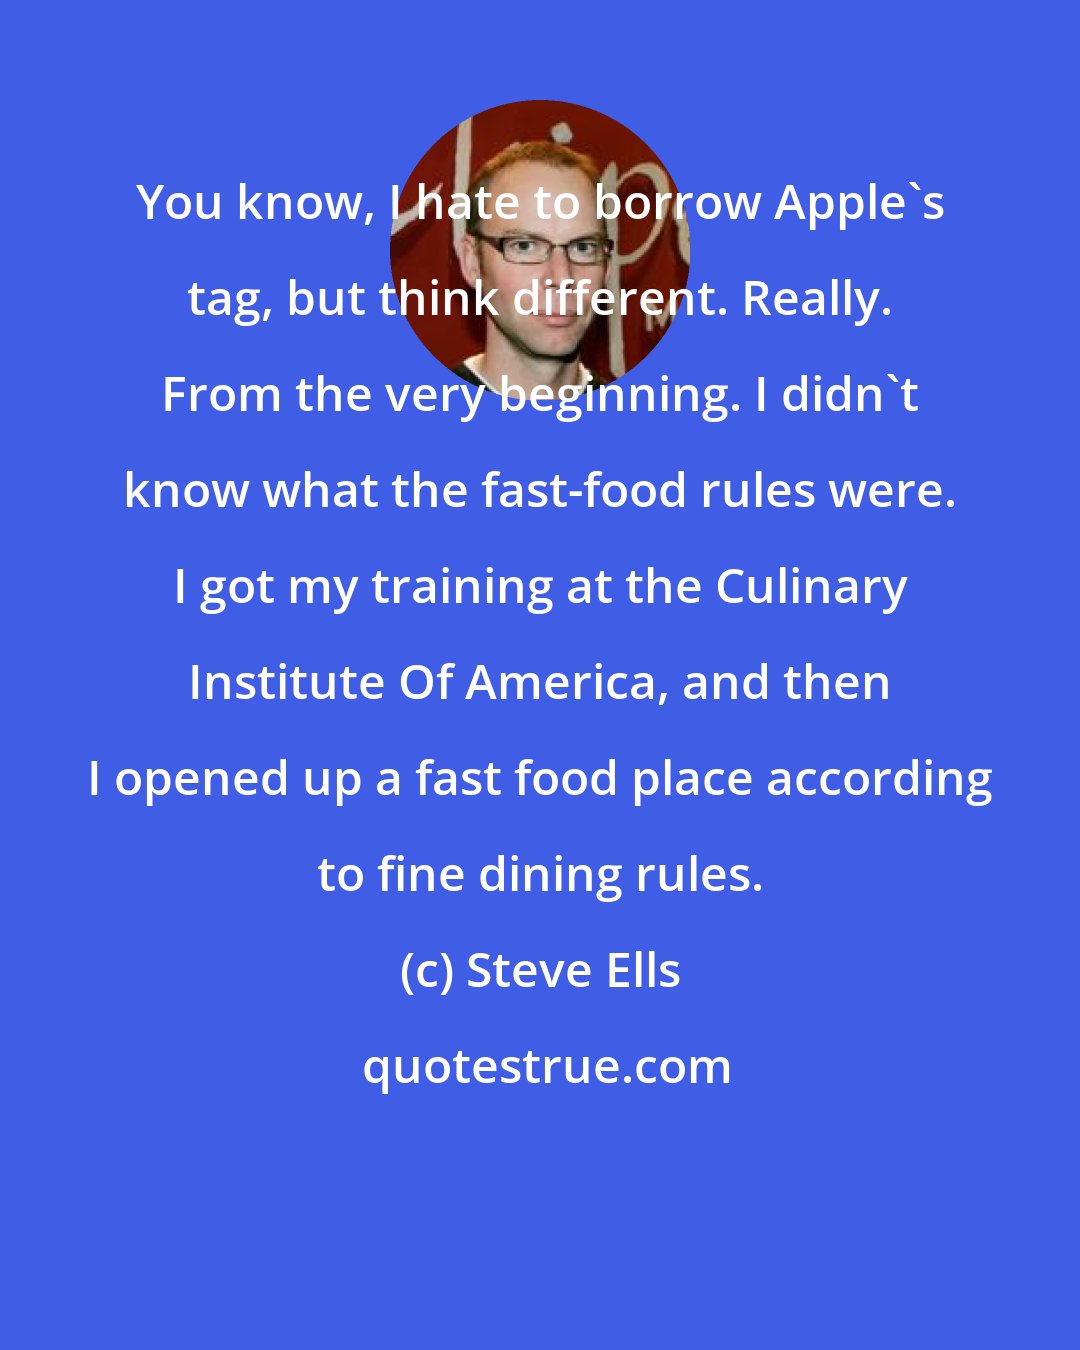 Steve Ells: You know, I hate to borrow Apple's tag, but think different. Really. From the very beginning. I didn't know what the fast-food rules were. I got my training at the Culinary Institute Of America, and then I opened up a fast food place according to fine dining rules.